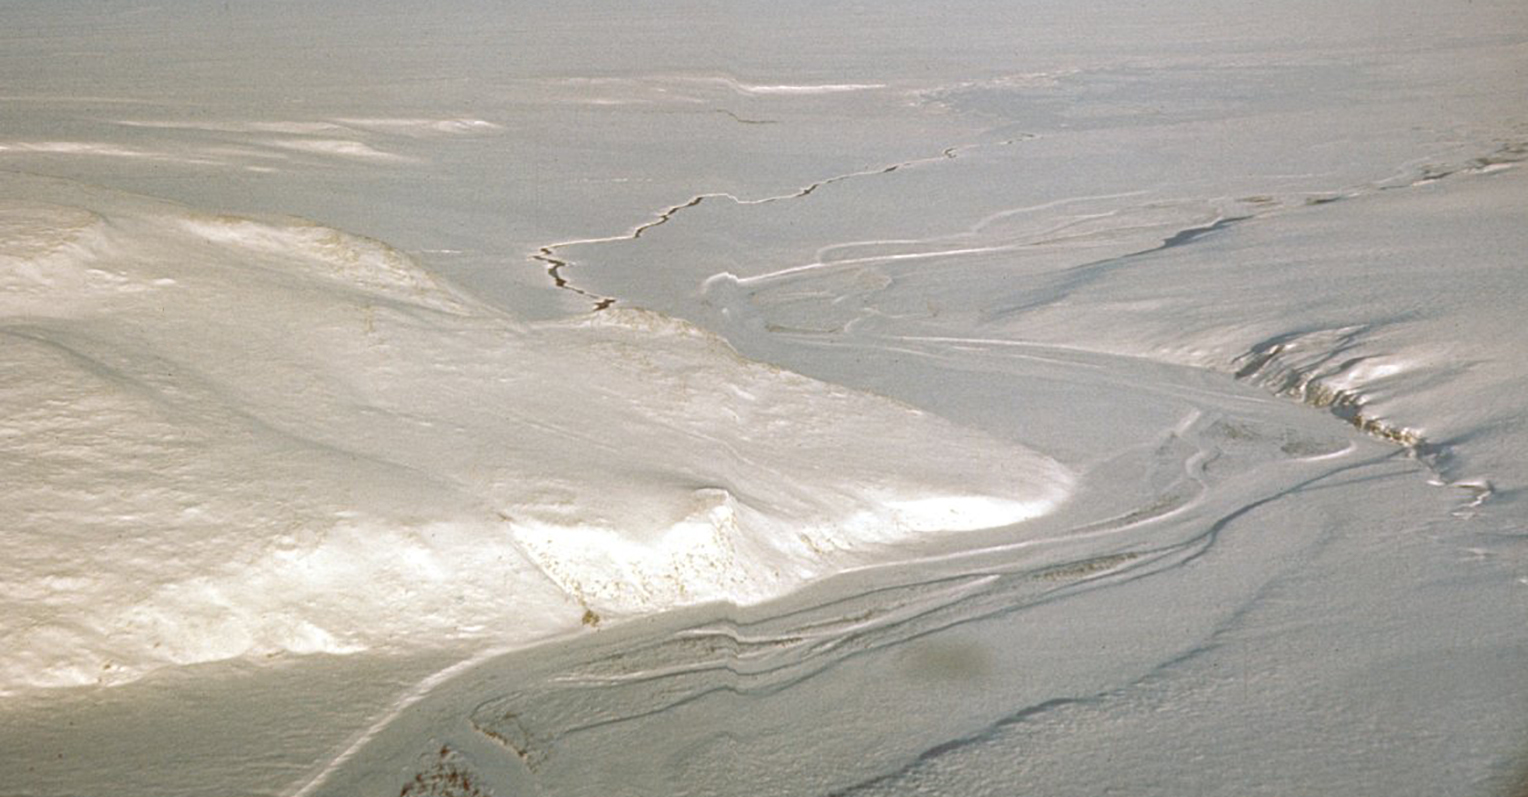 a snow scene showing topography including hills and a river from an aerial view